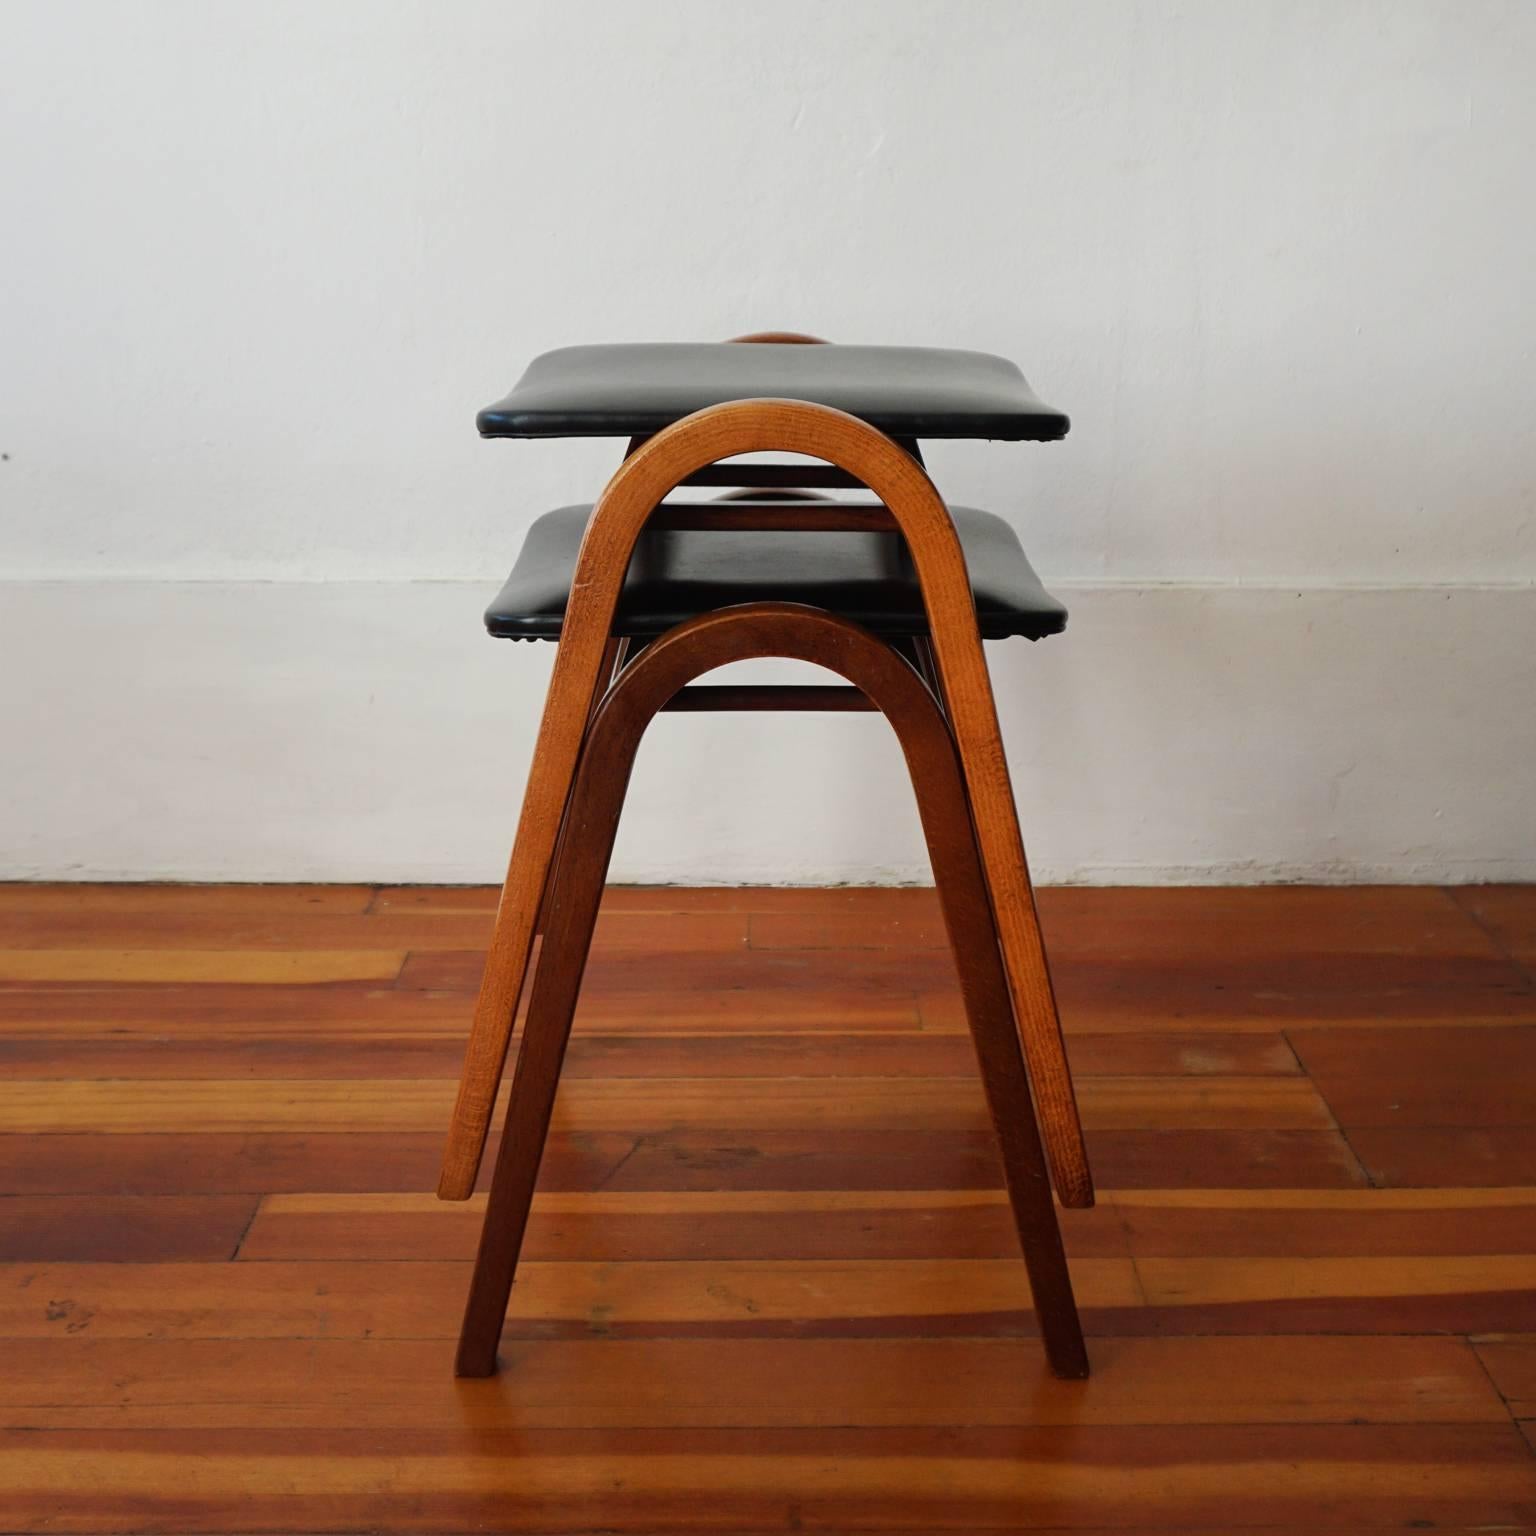 A pair of stools by Isamu Kenmochi (1912-1971) for Akita Mokko, Japan, circa 1950.

Kenmochi was one of the most significant designers in Mid-Century, Japan. He was a founding member of the Japan Industrial designers, which included Sori Yanagi